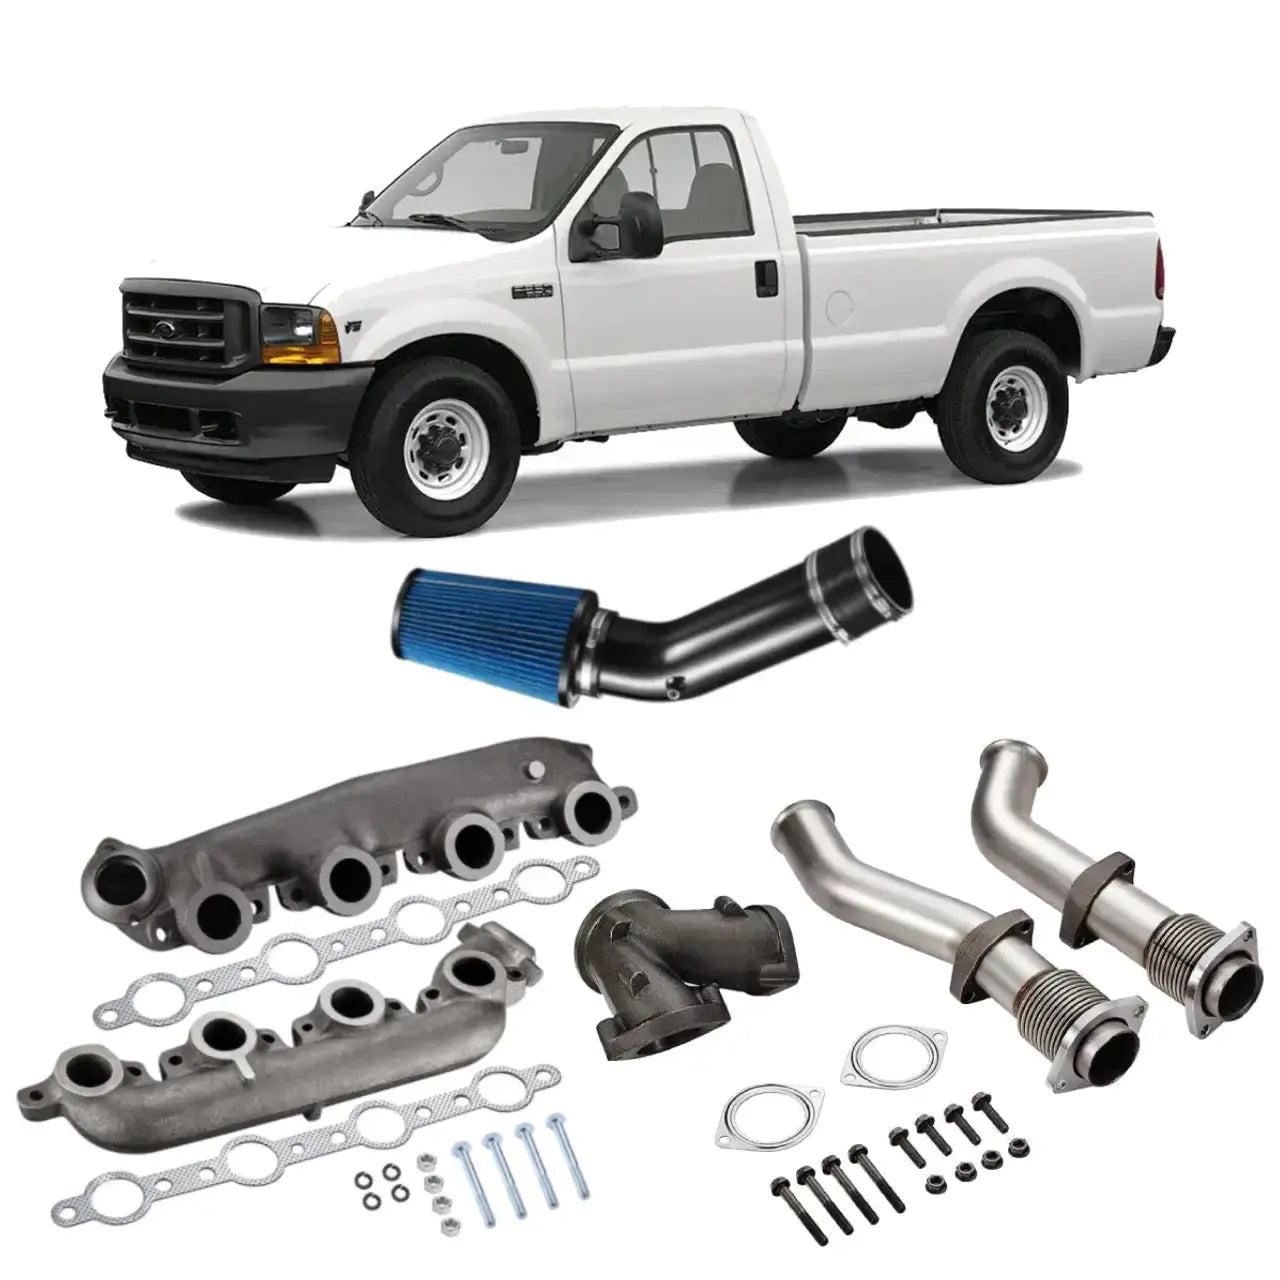 1999.5-2003 Ford 7.3 Powerstroke Diesel All-In-One Kit Exhaust Manifold/Up-Pipe Exhaust/Cold Air Intake Kit Flashark